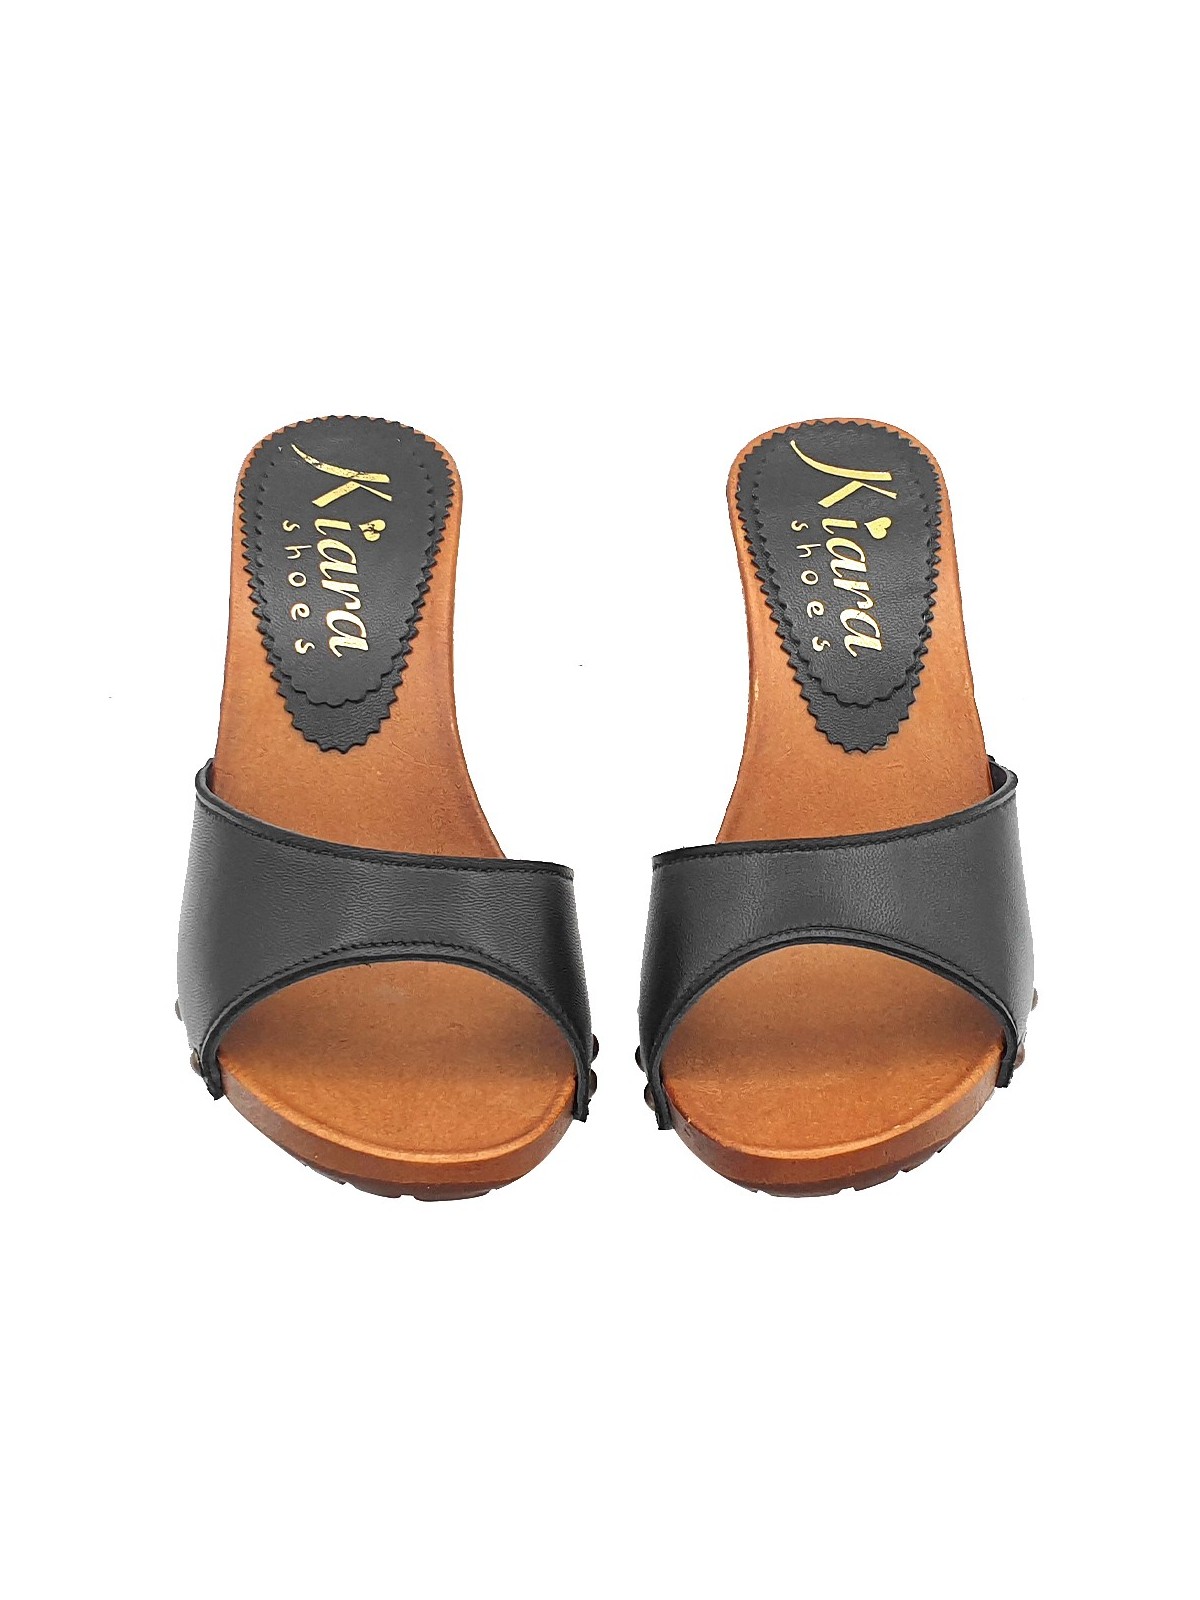 CLOGS WITH BLACK LEATHER BAND